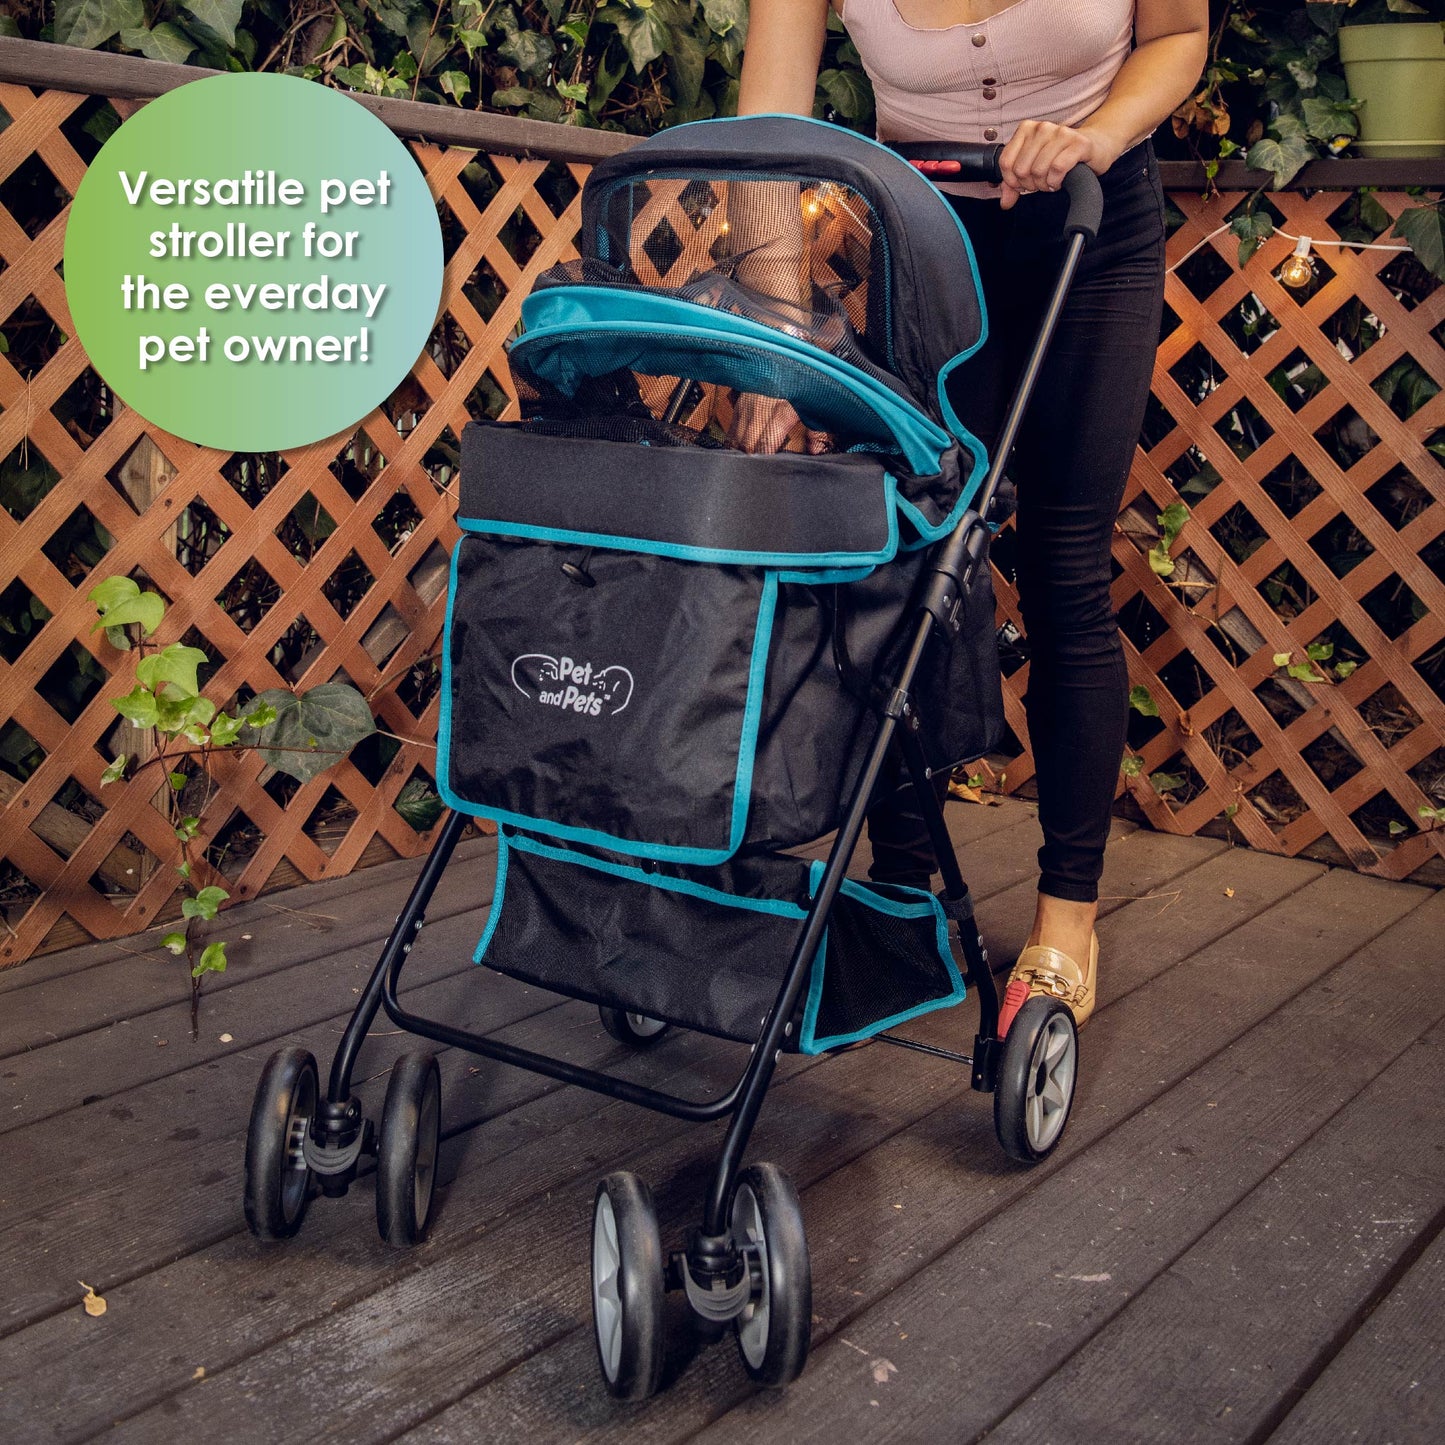 Swift Pet Stroller -  Zipperless, Quality Mesh Windows, Pee Pad Insert, Double Rear Brakes, Rotating Front Wheels, Lightweight, Two-Way Canopy, for Small Dogs/Cats, Supports pets up to 45LBS